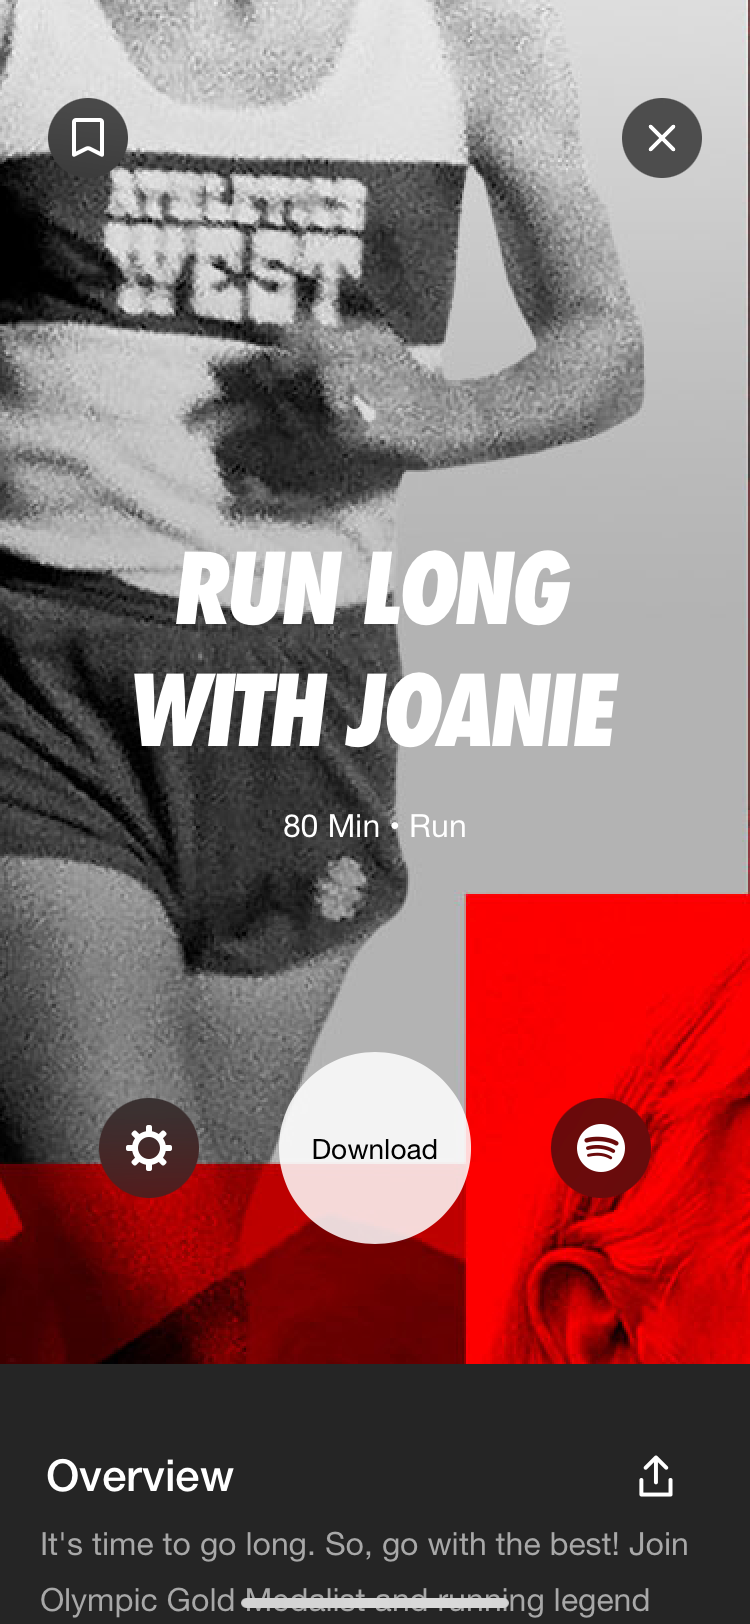 Nike Run Club app guided run narrated by Olympic Gold Medalist